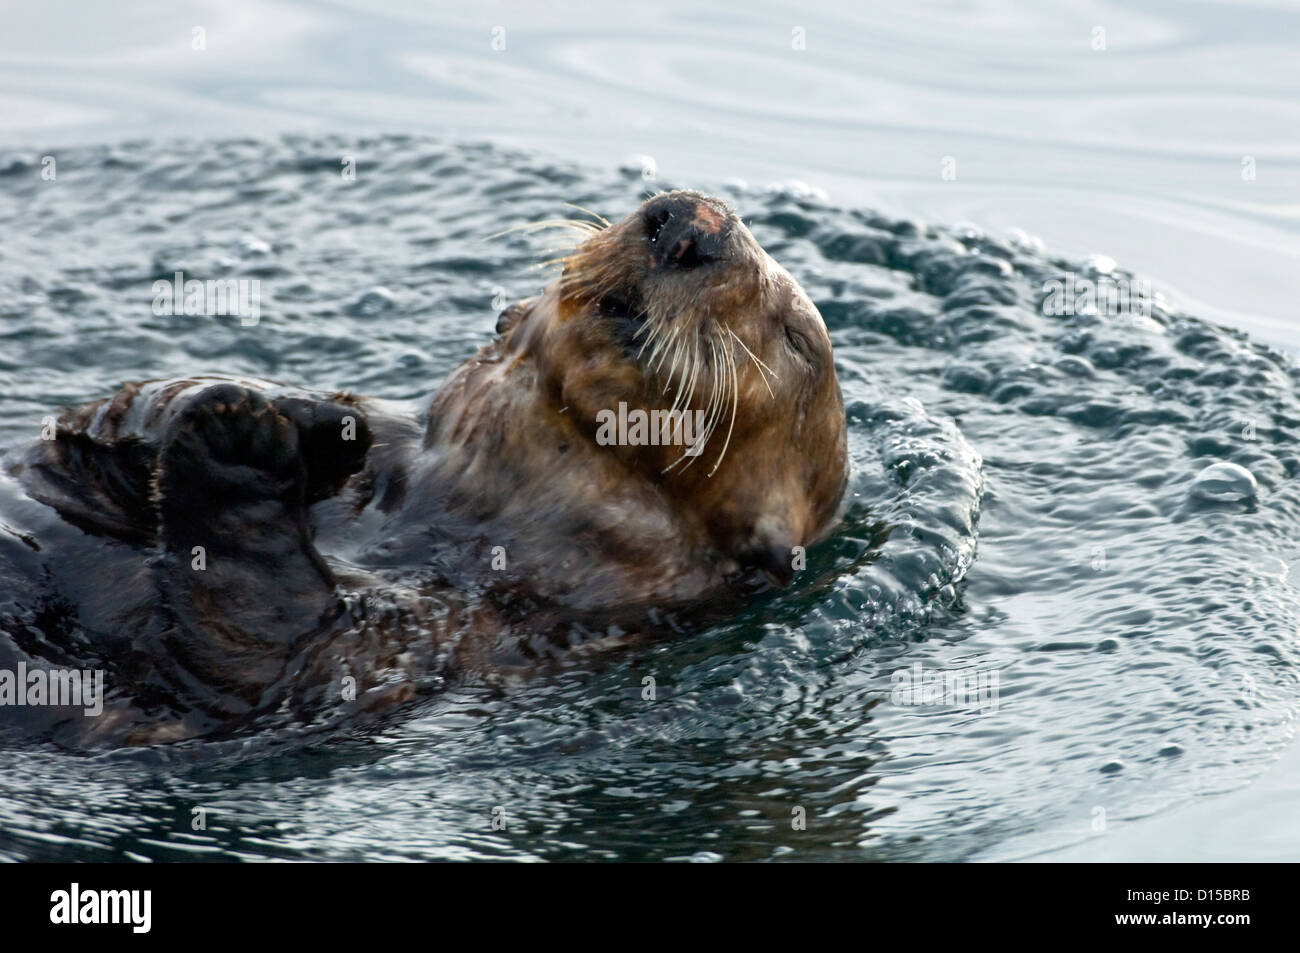 A sea otter, Enhydra lutris, rests on the surface of the Inside Passage, Vancouver Island, British Columbia, Canada Stock Photo